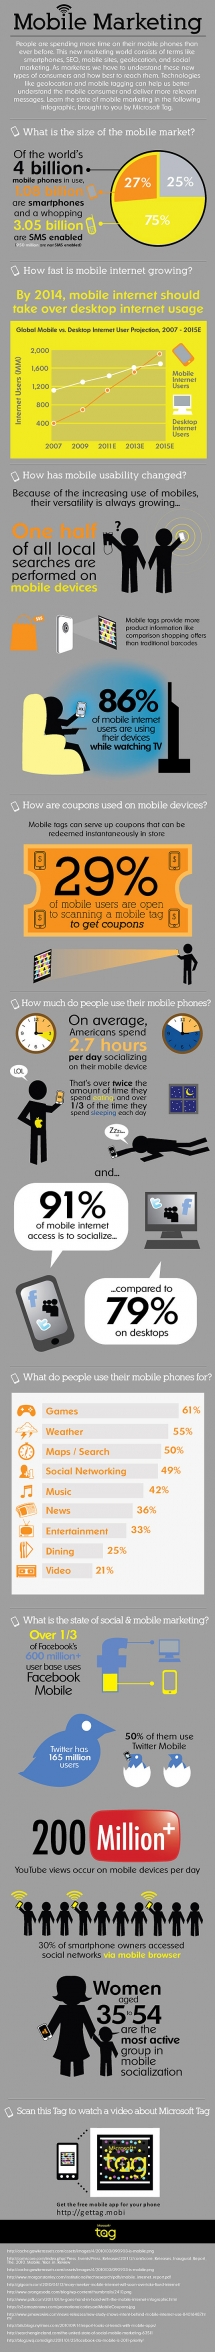 Awesome infographic about mobile phone use - My tech faves